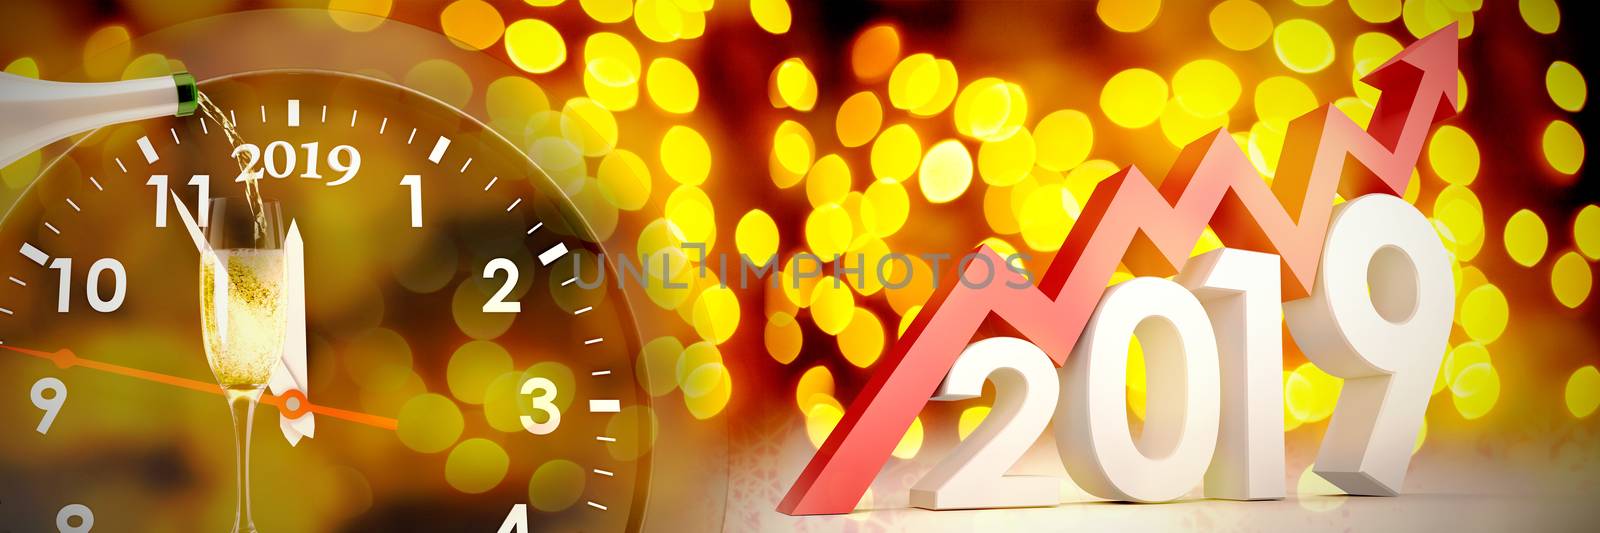 Three dimensional new year numbers with arrow against unfocused yellow christmas light